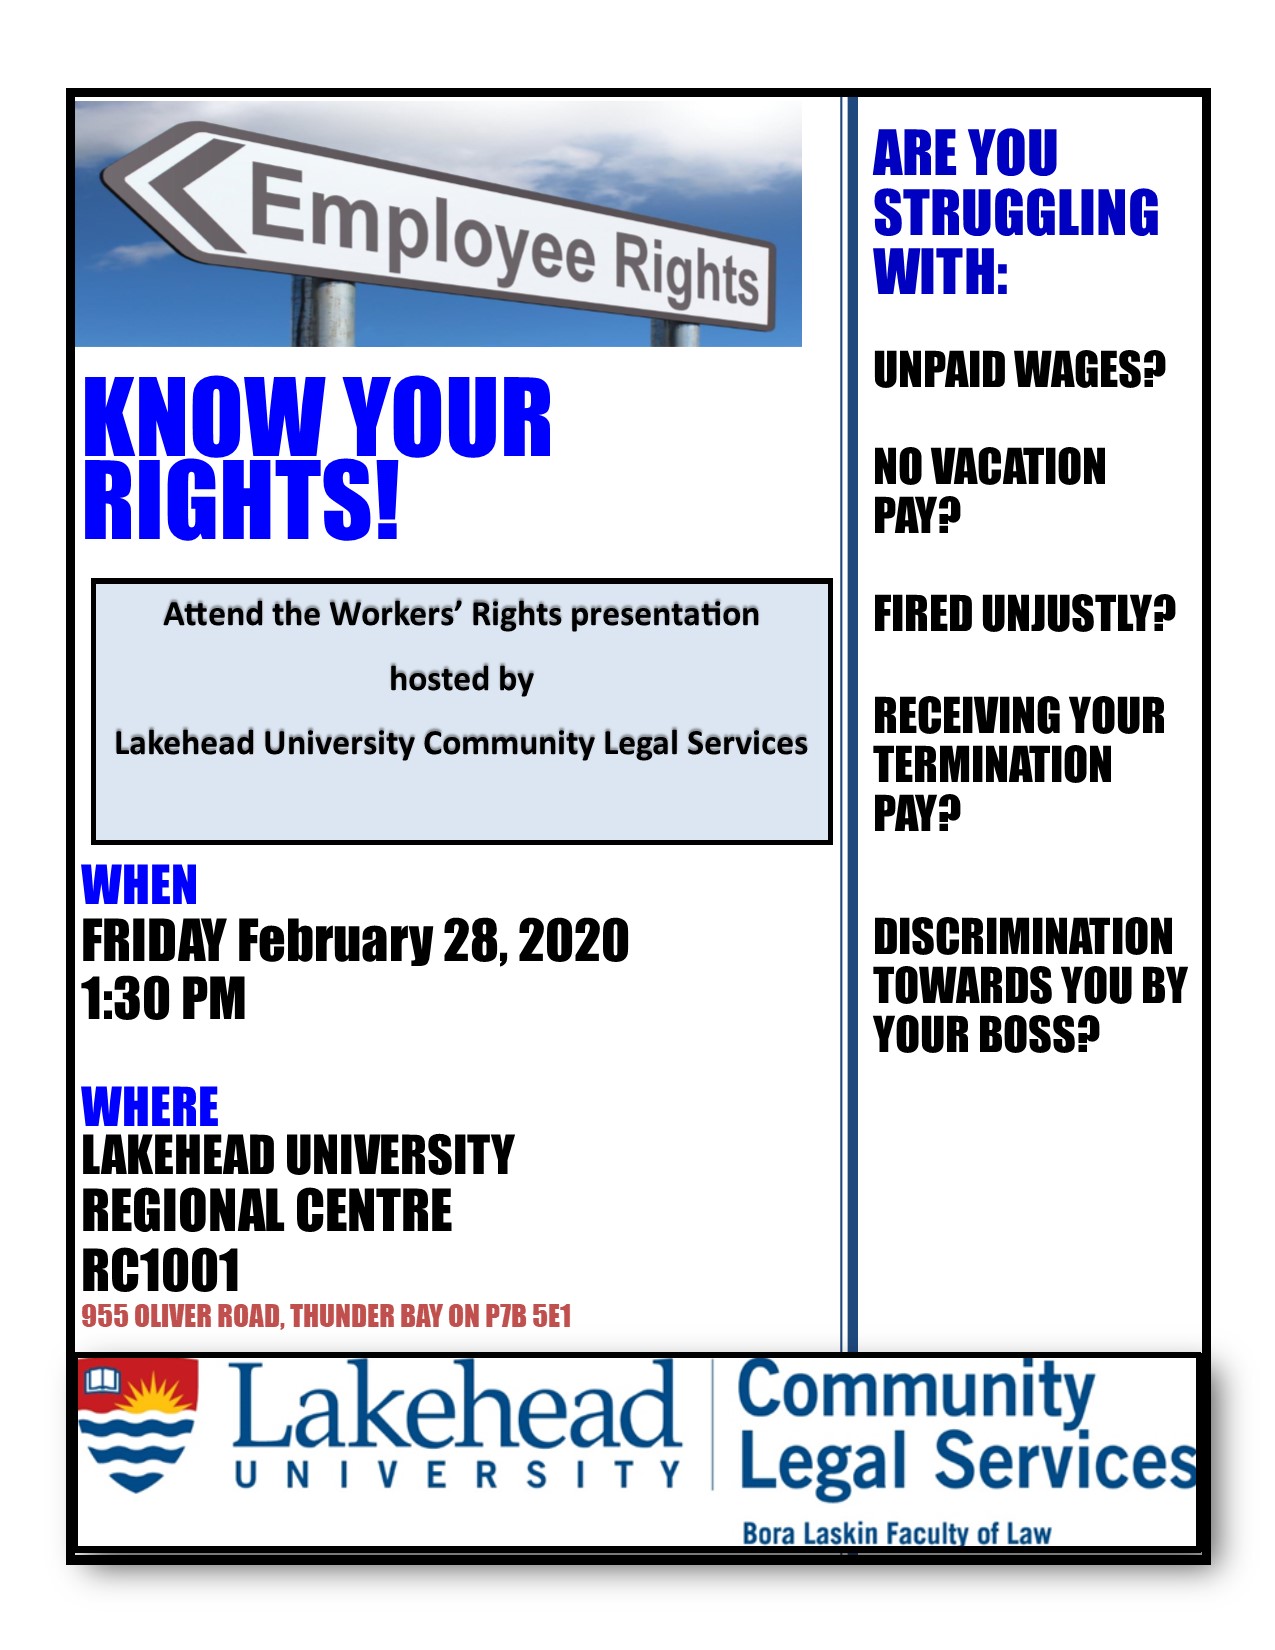 workers-rights-presentation-hosted-by-lakehead-university-community